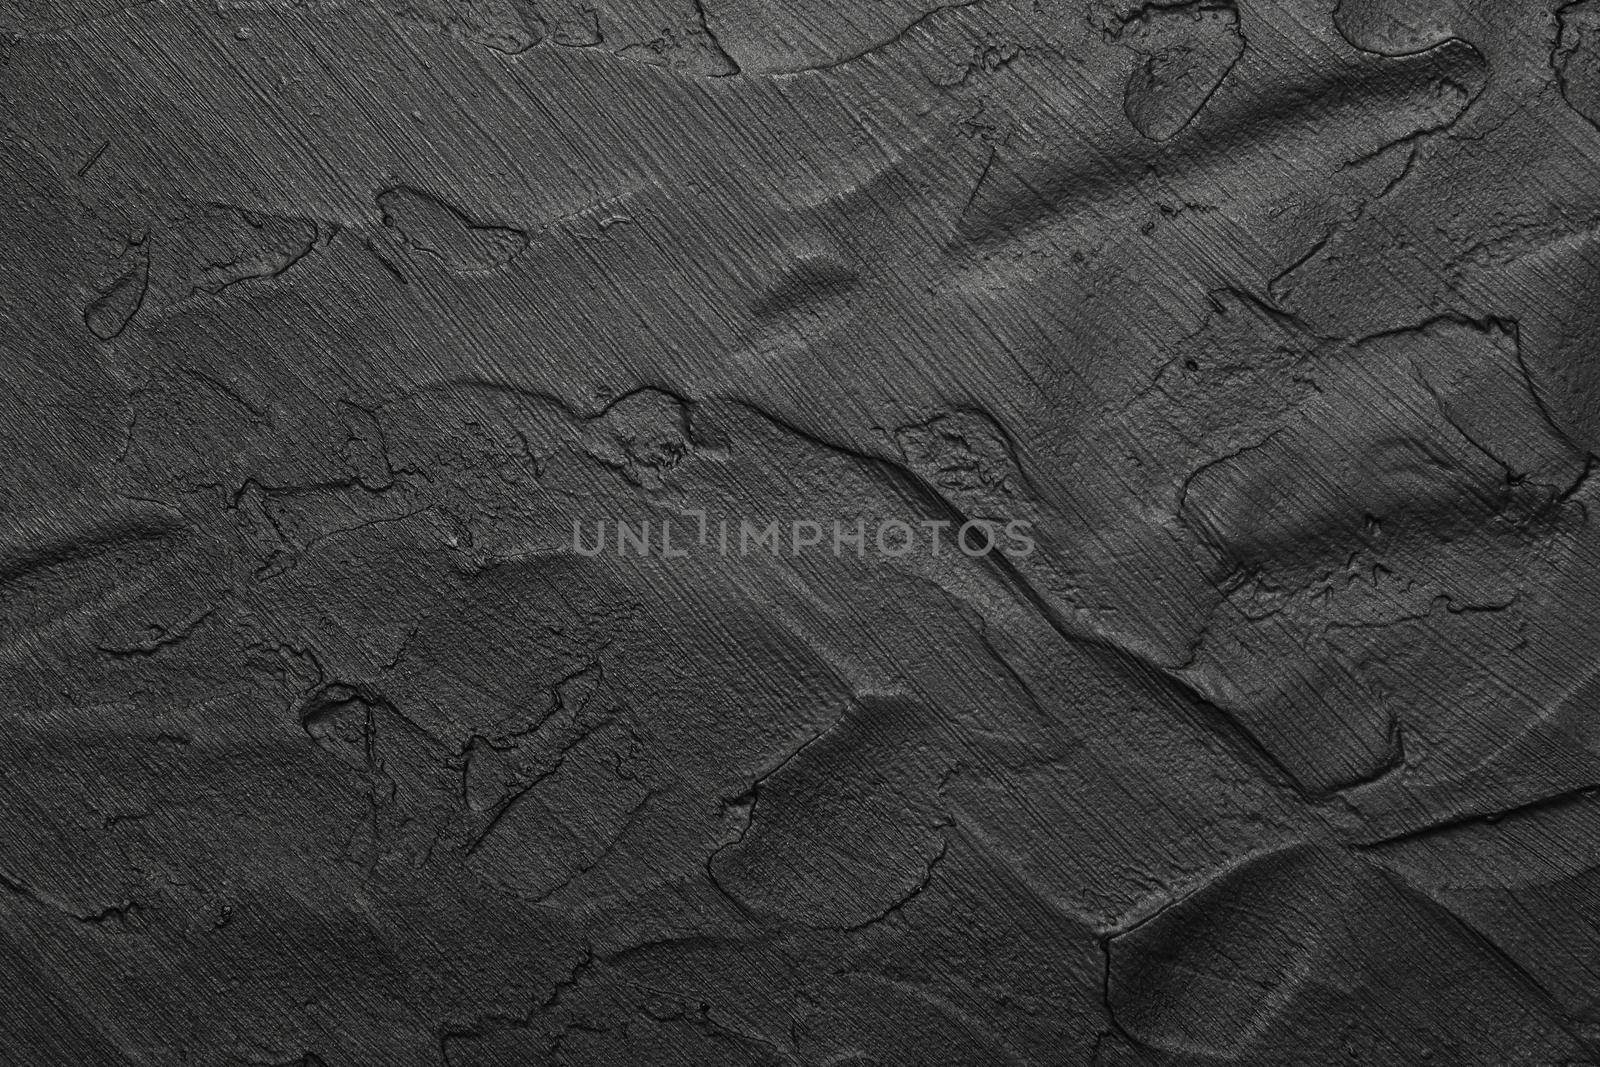 Black abstract background texture of uneven grunge surface with brushstrokes of plaster and paint